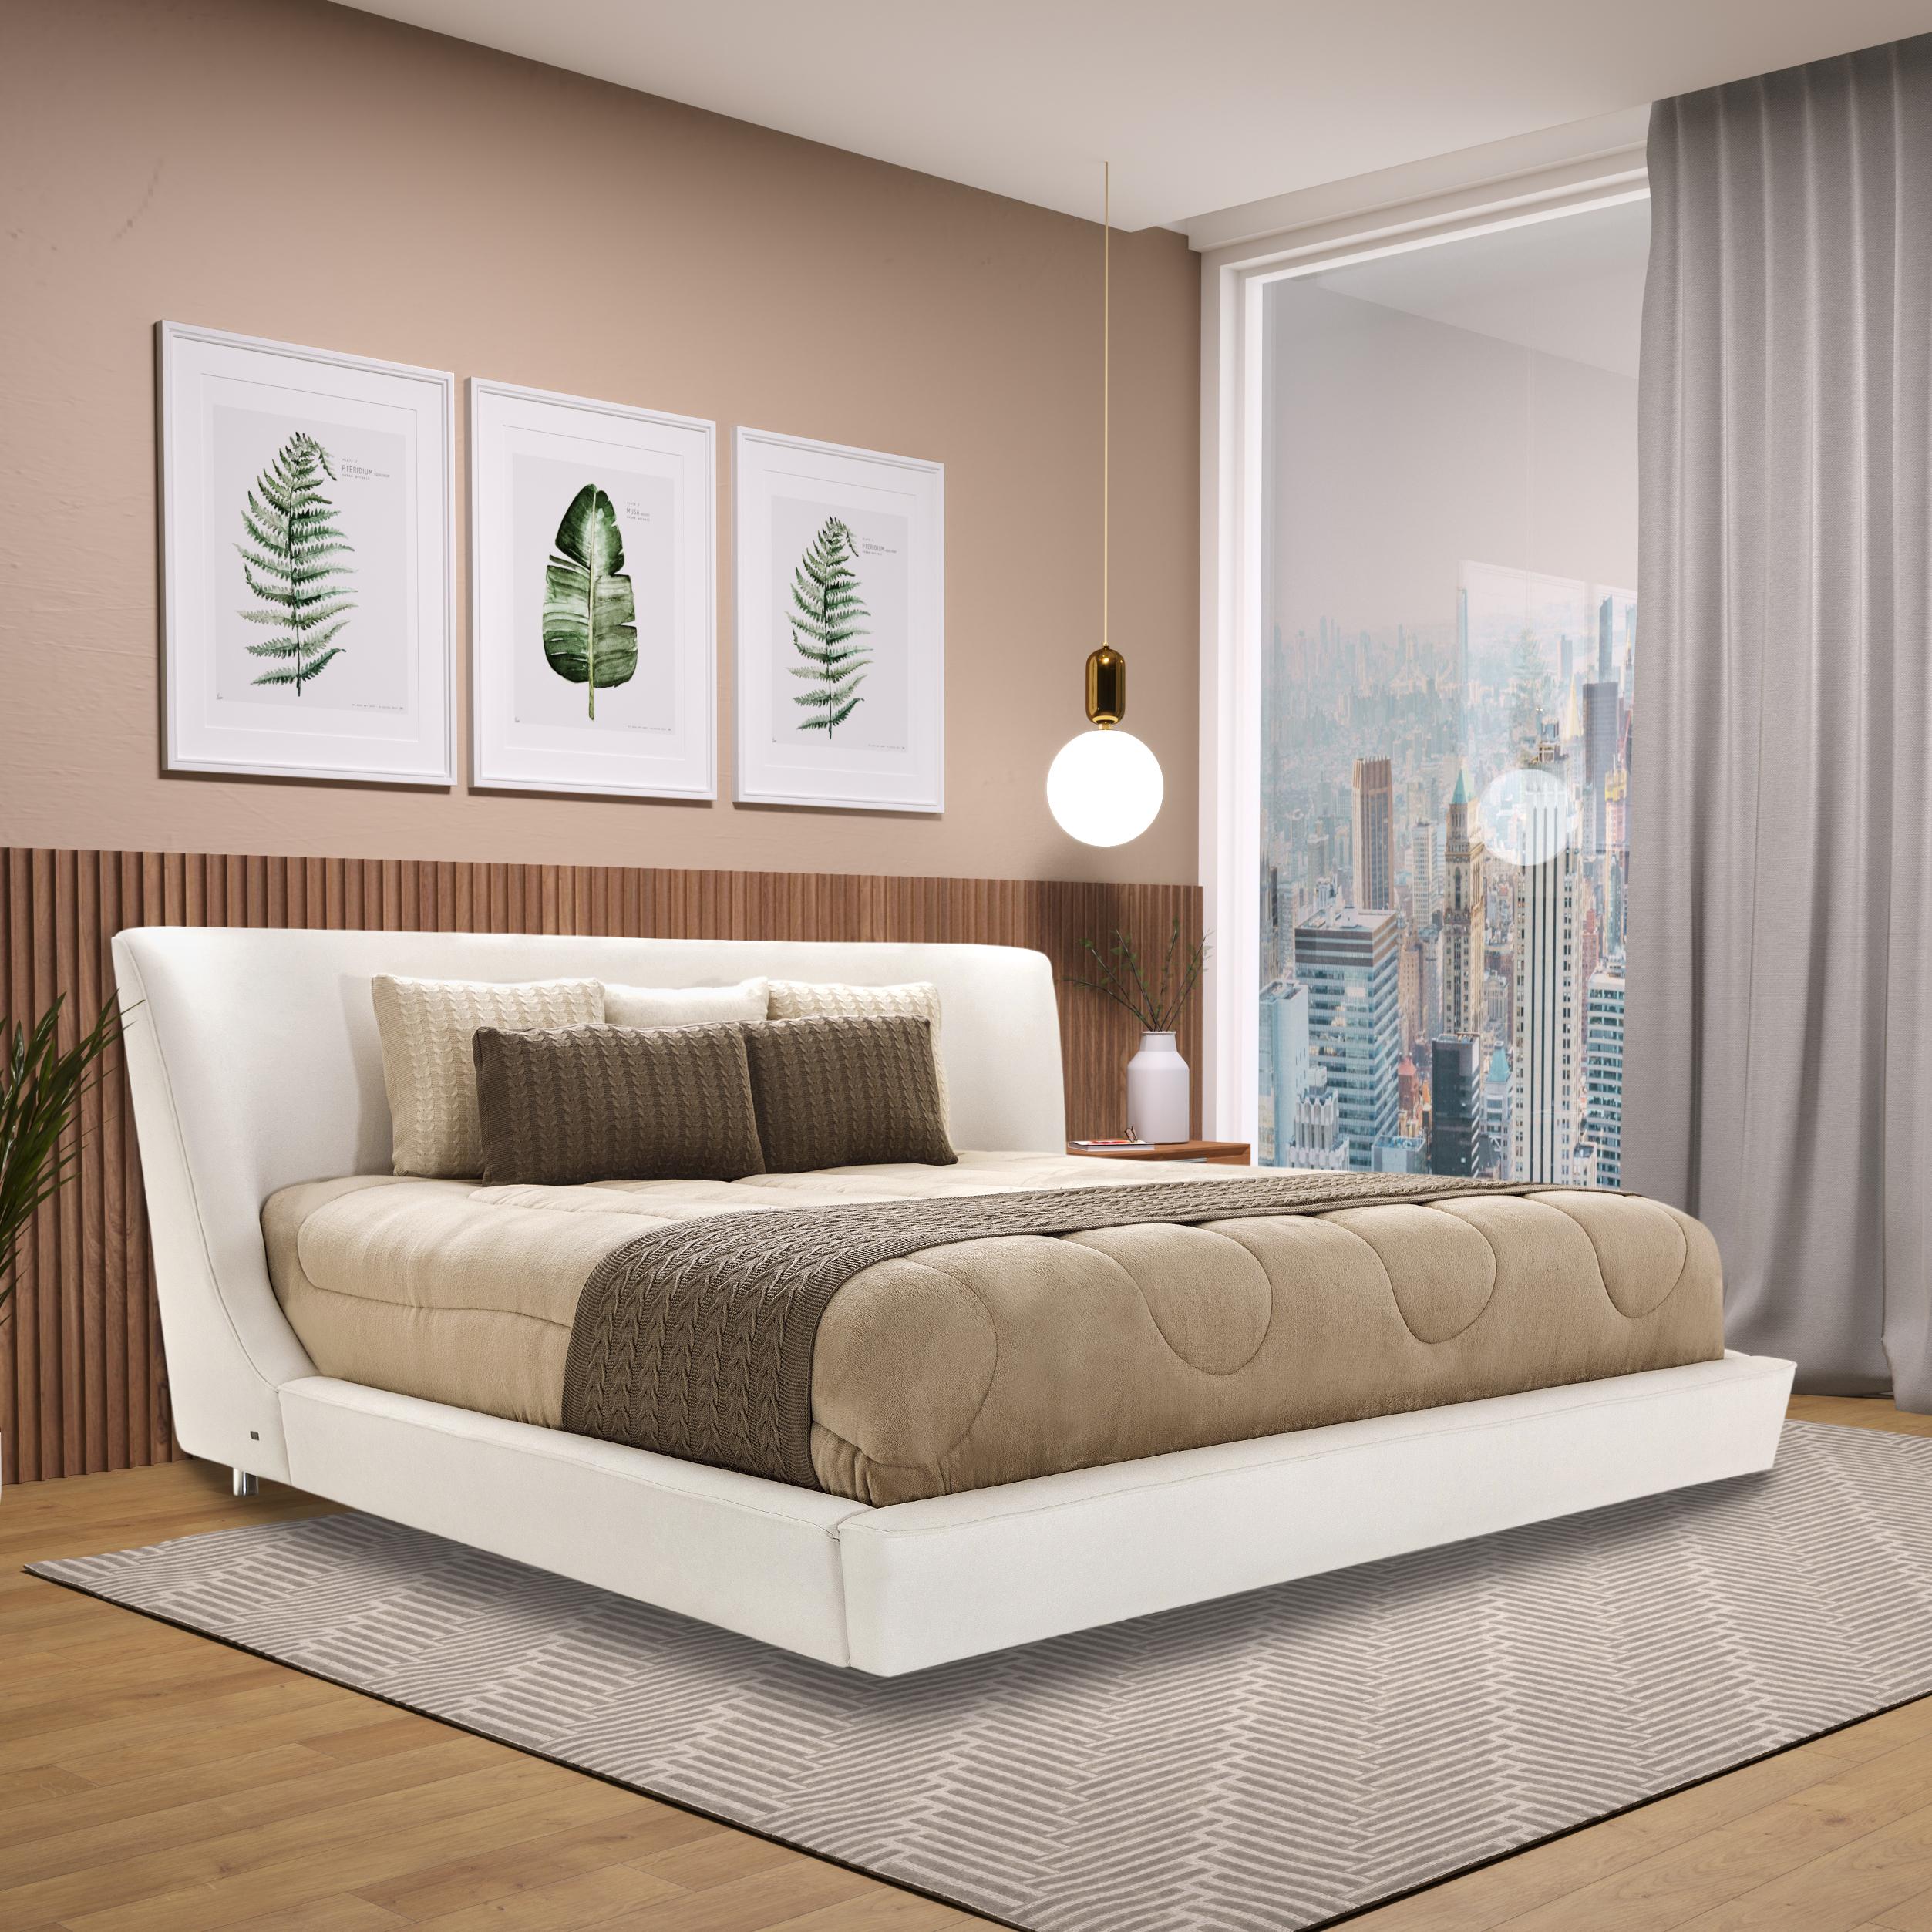 The amazing designers from the Uultis team have fabricated this beautiful Musa king bed in a light beige fabric with a shell shape as a headboard that is supported by an angular frame, covered with foam and fabric. This is a sophisticated and cozy